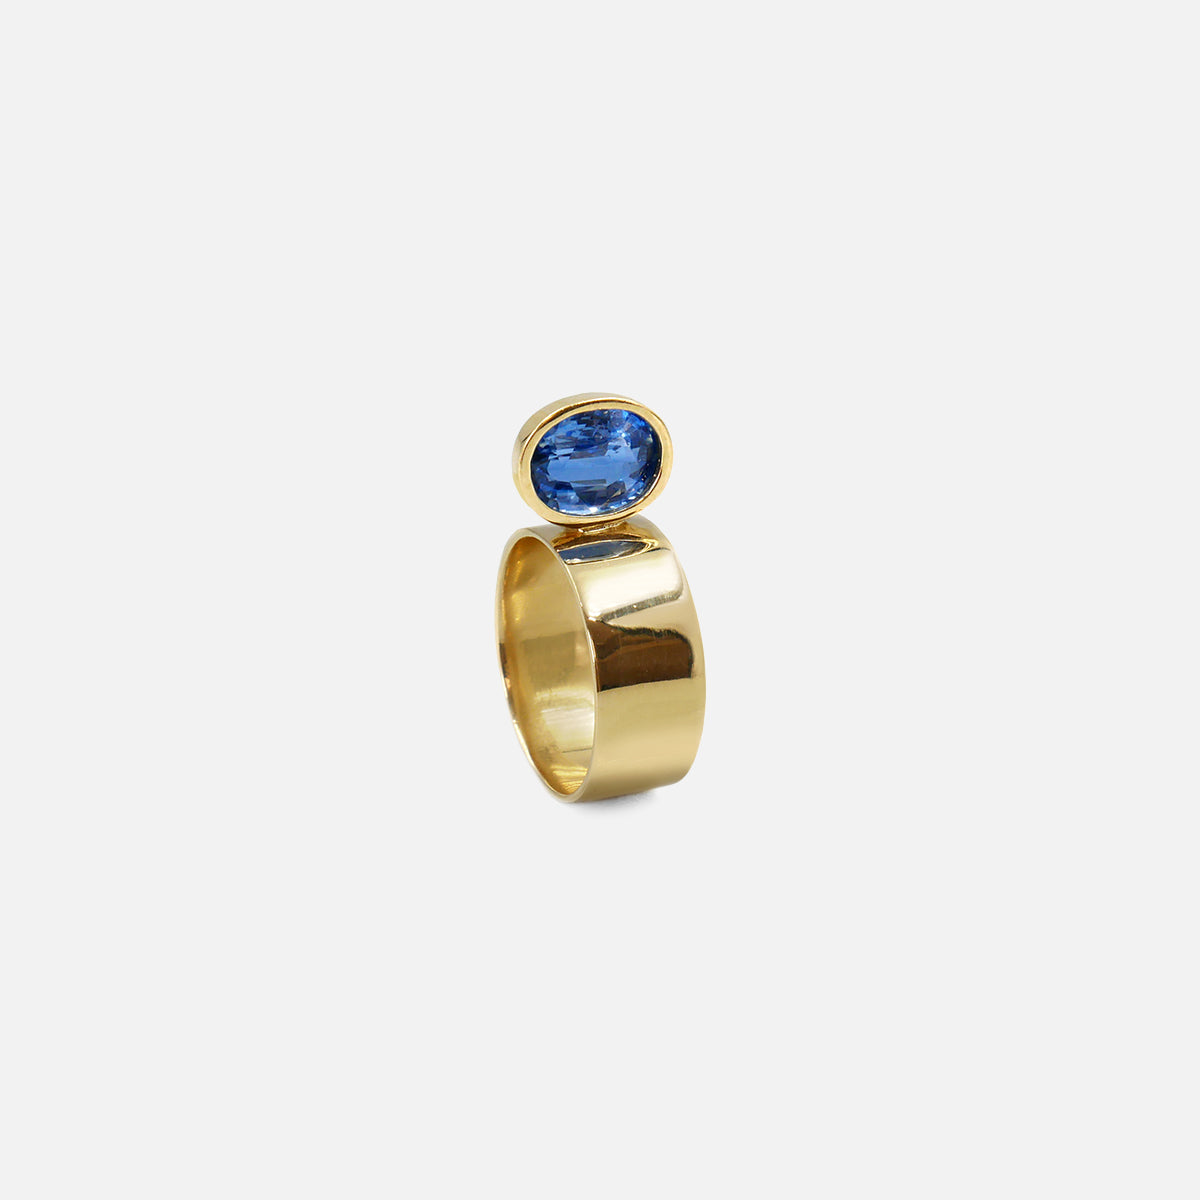 Perched Setting Ring with Oval Blue Himalayan Kyanite